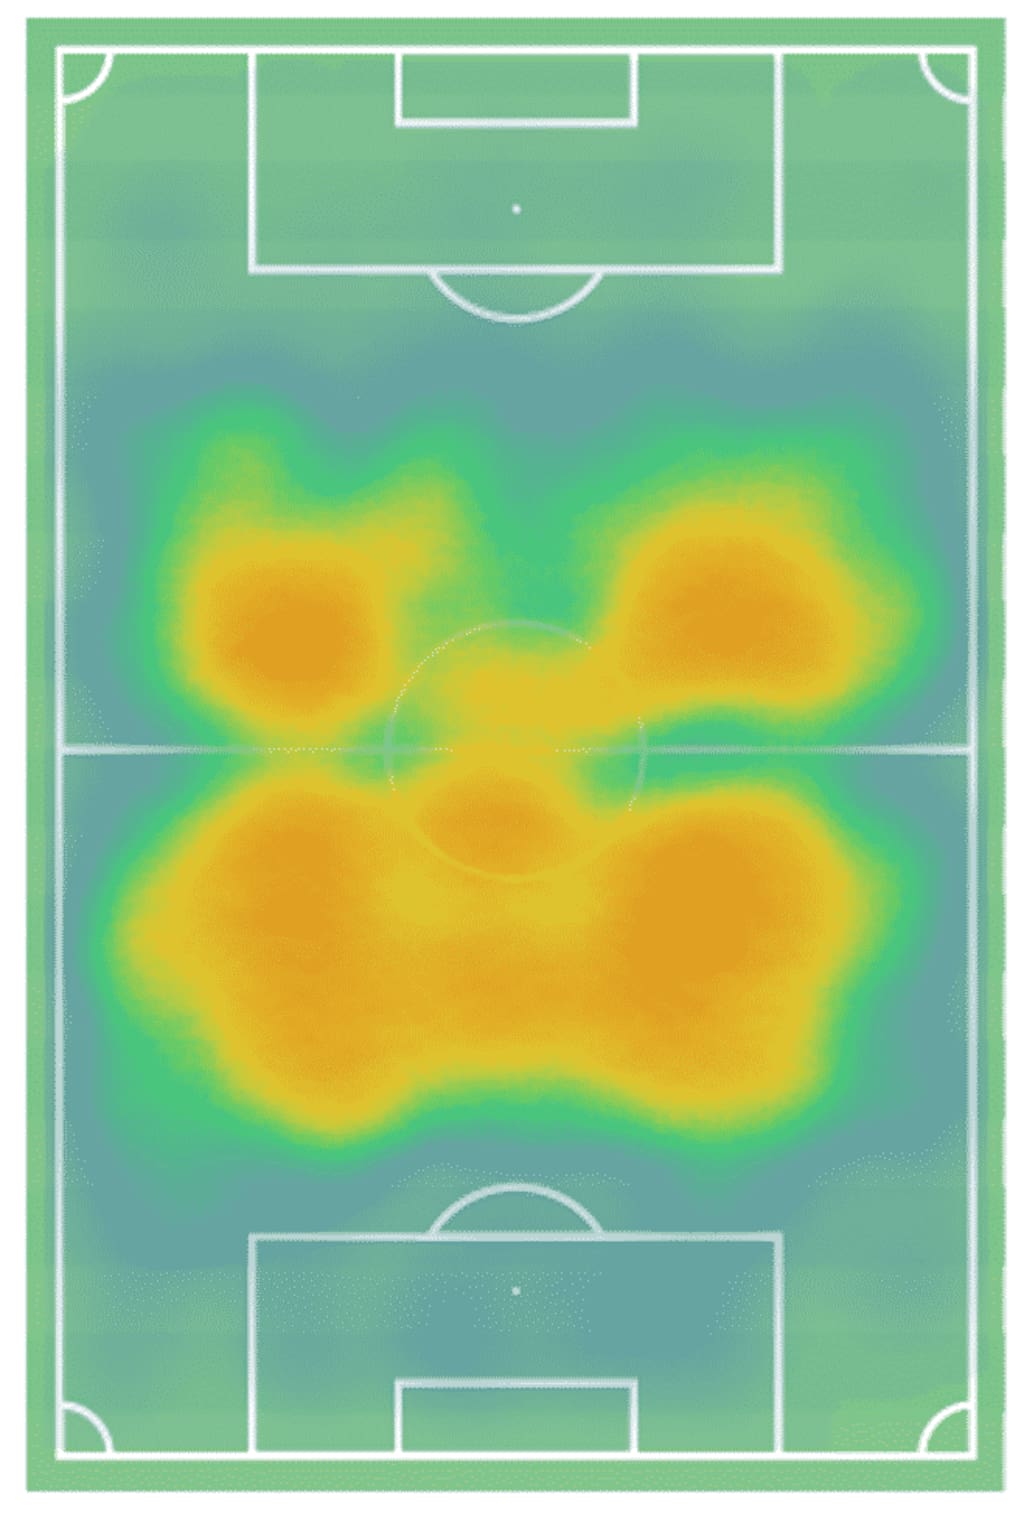 The heat map from the 2019/20 campaign shows the coverage of the pitch Camavinga works in. Not favouring a particular side, the Frenchman provides the perfect engine for the team and much more.